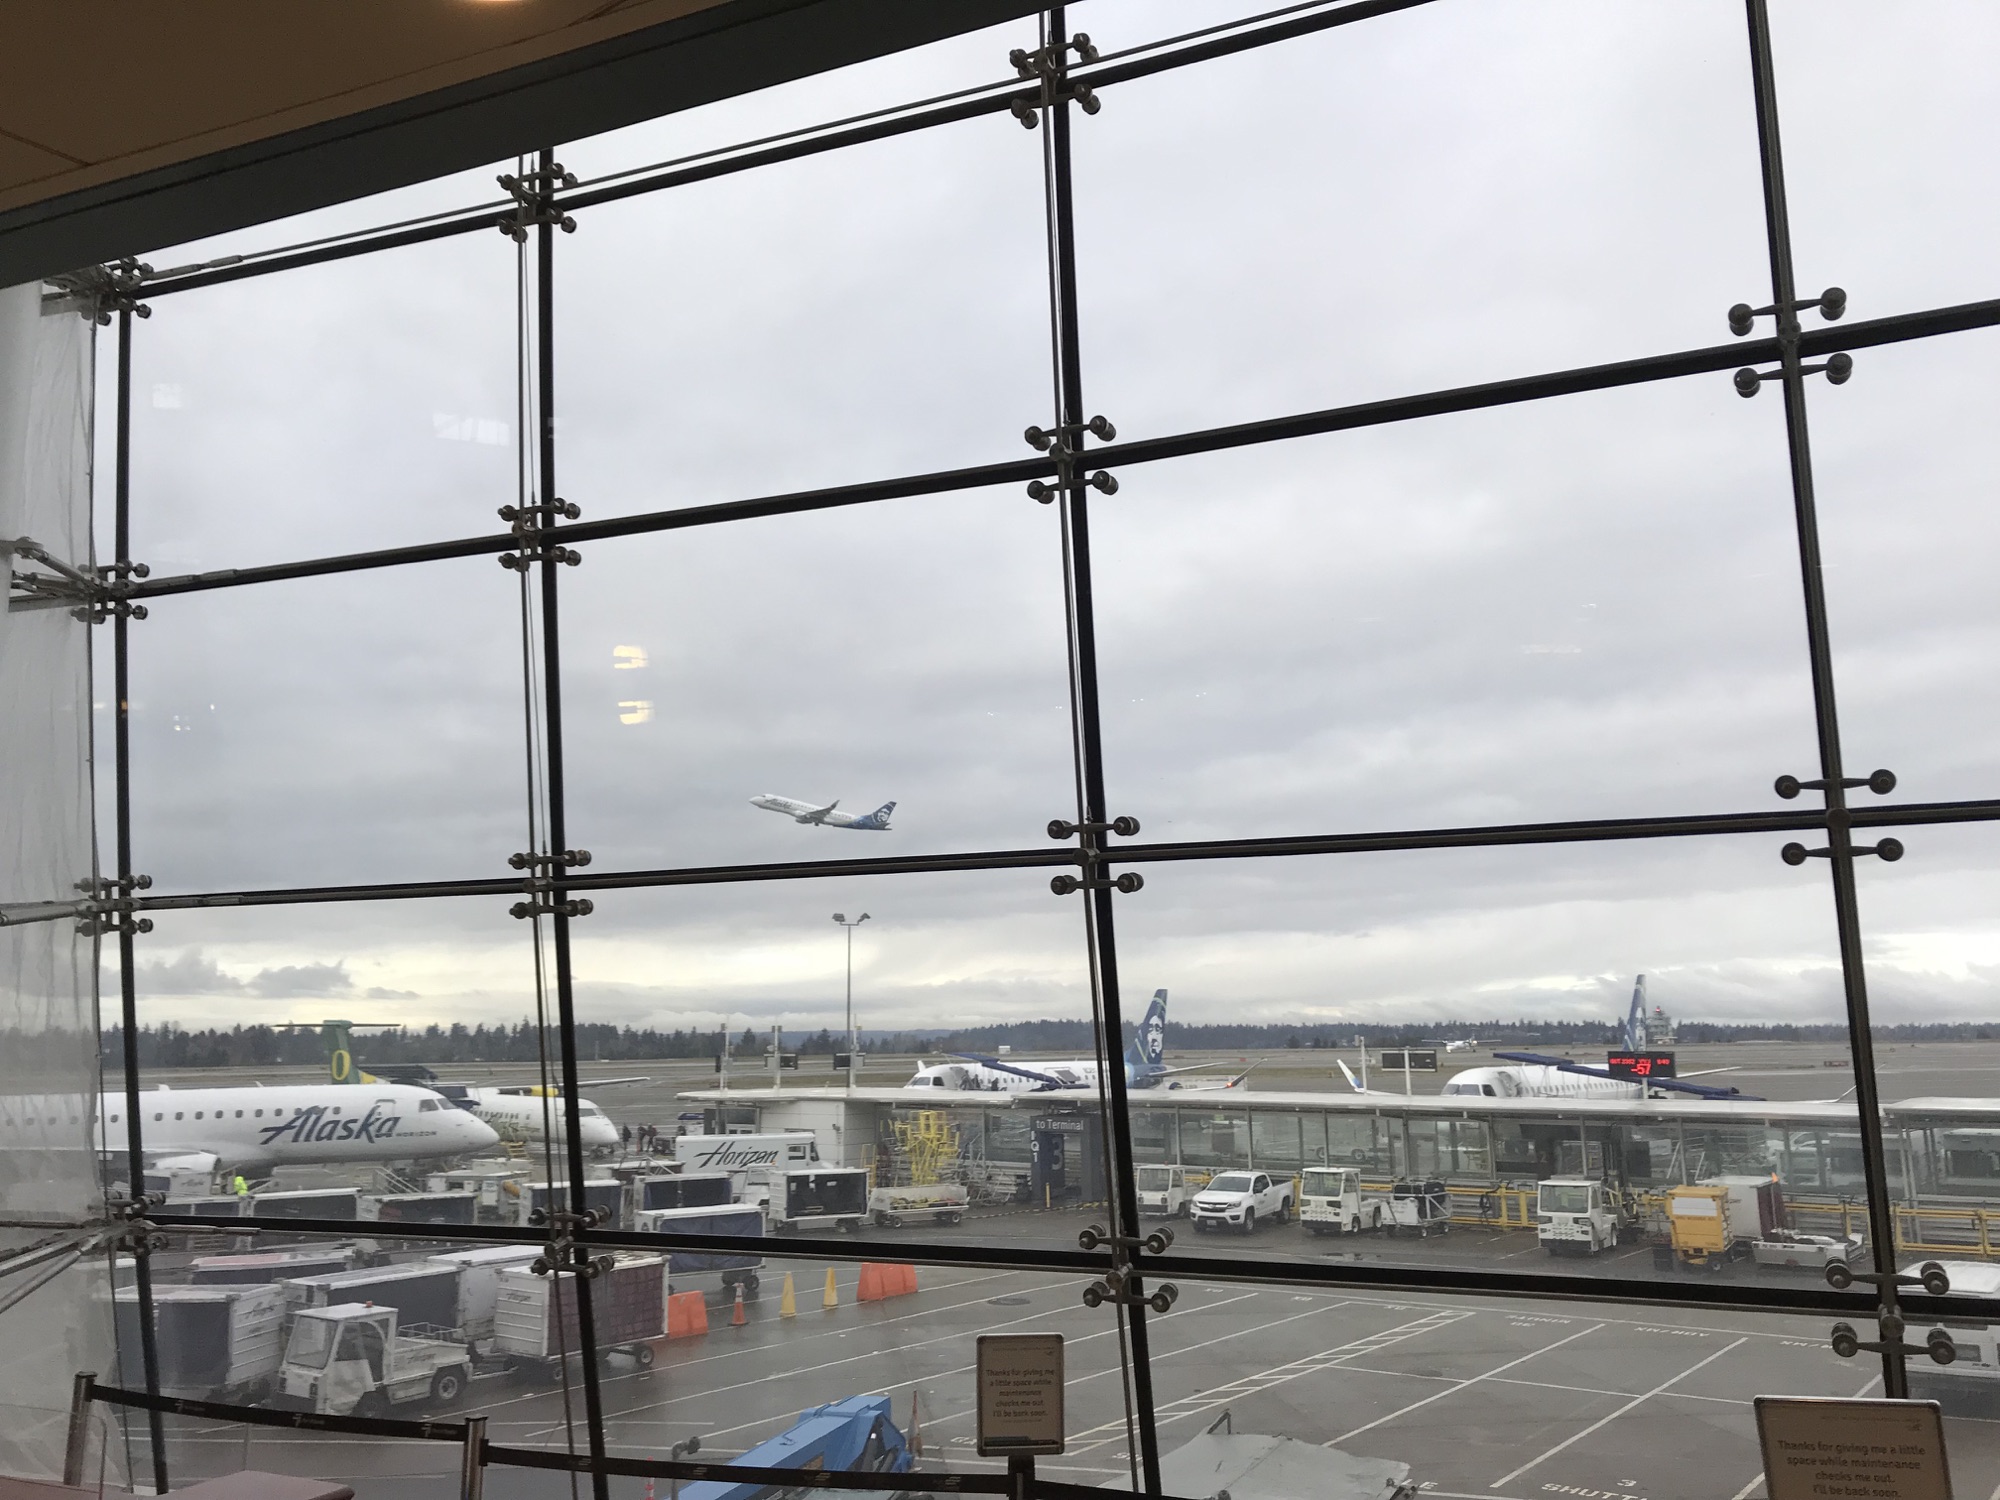 The view from Seattle Airport